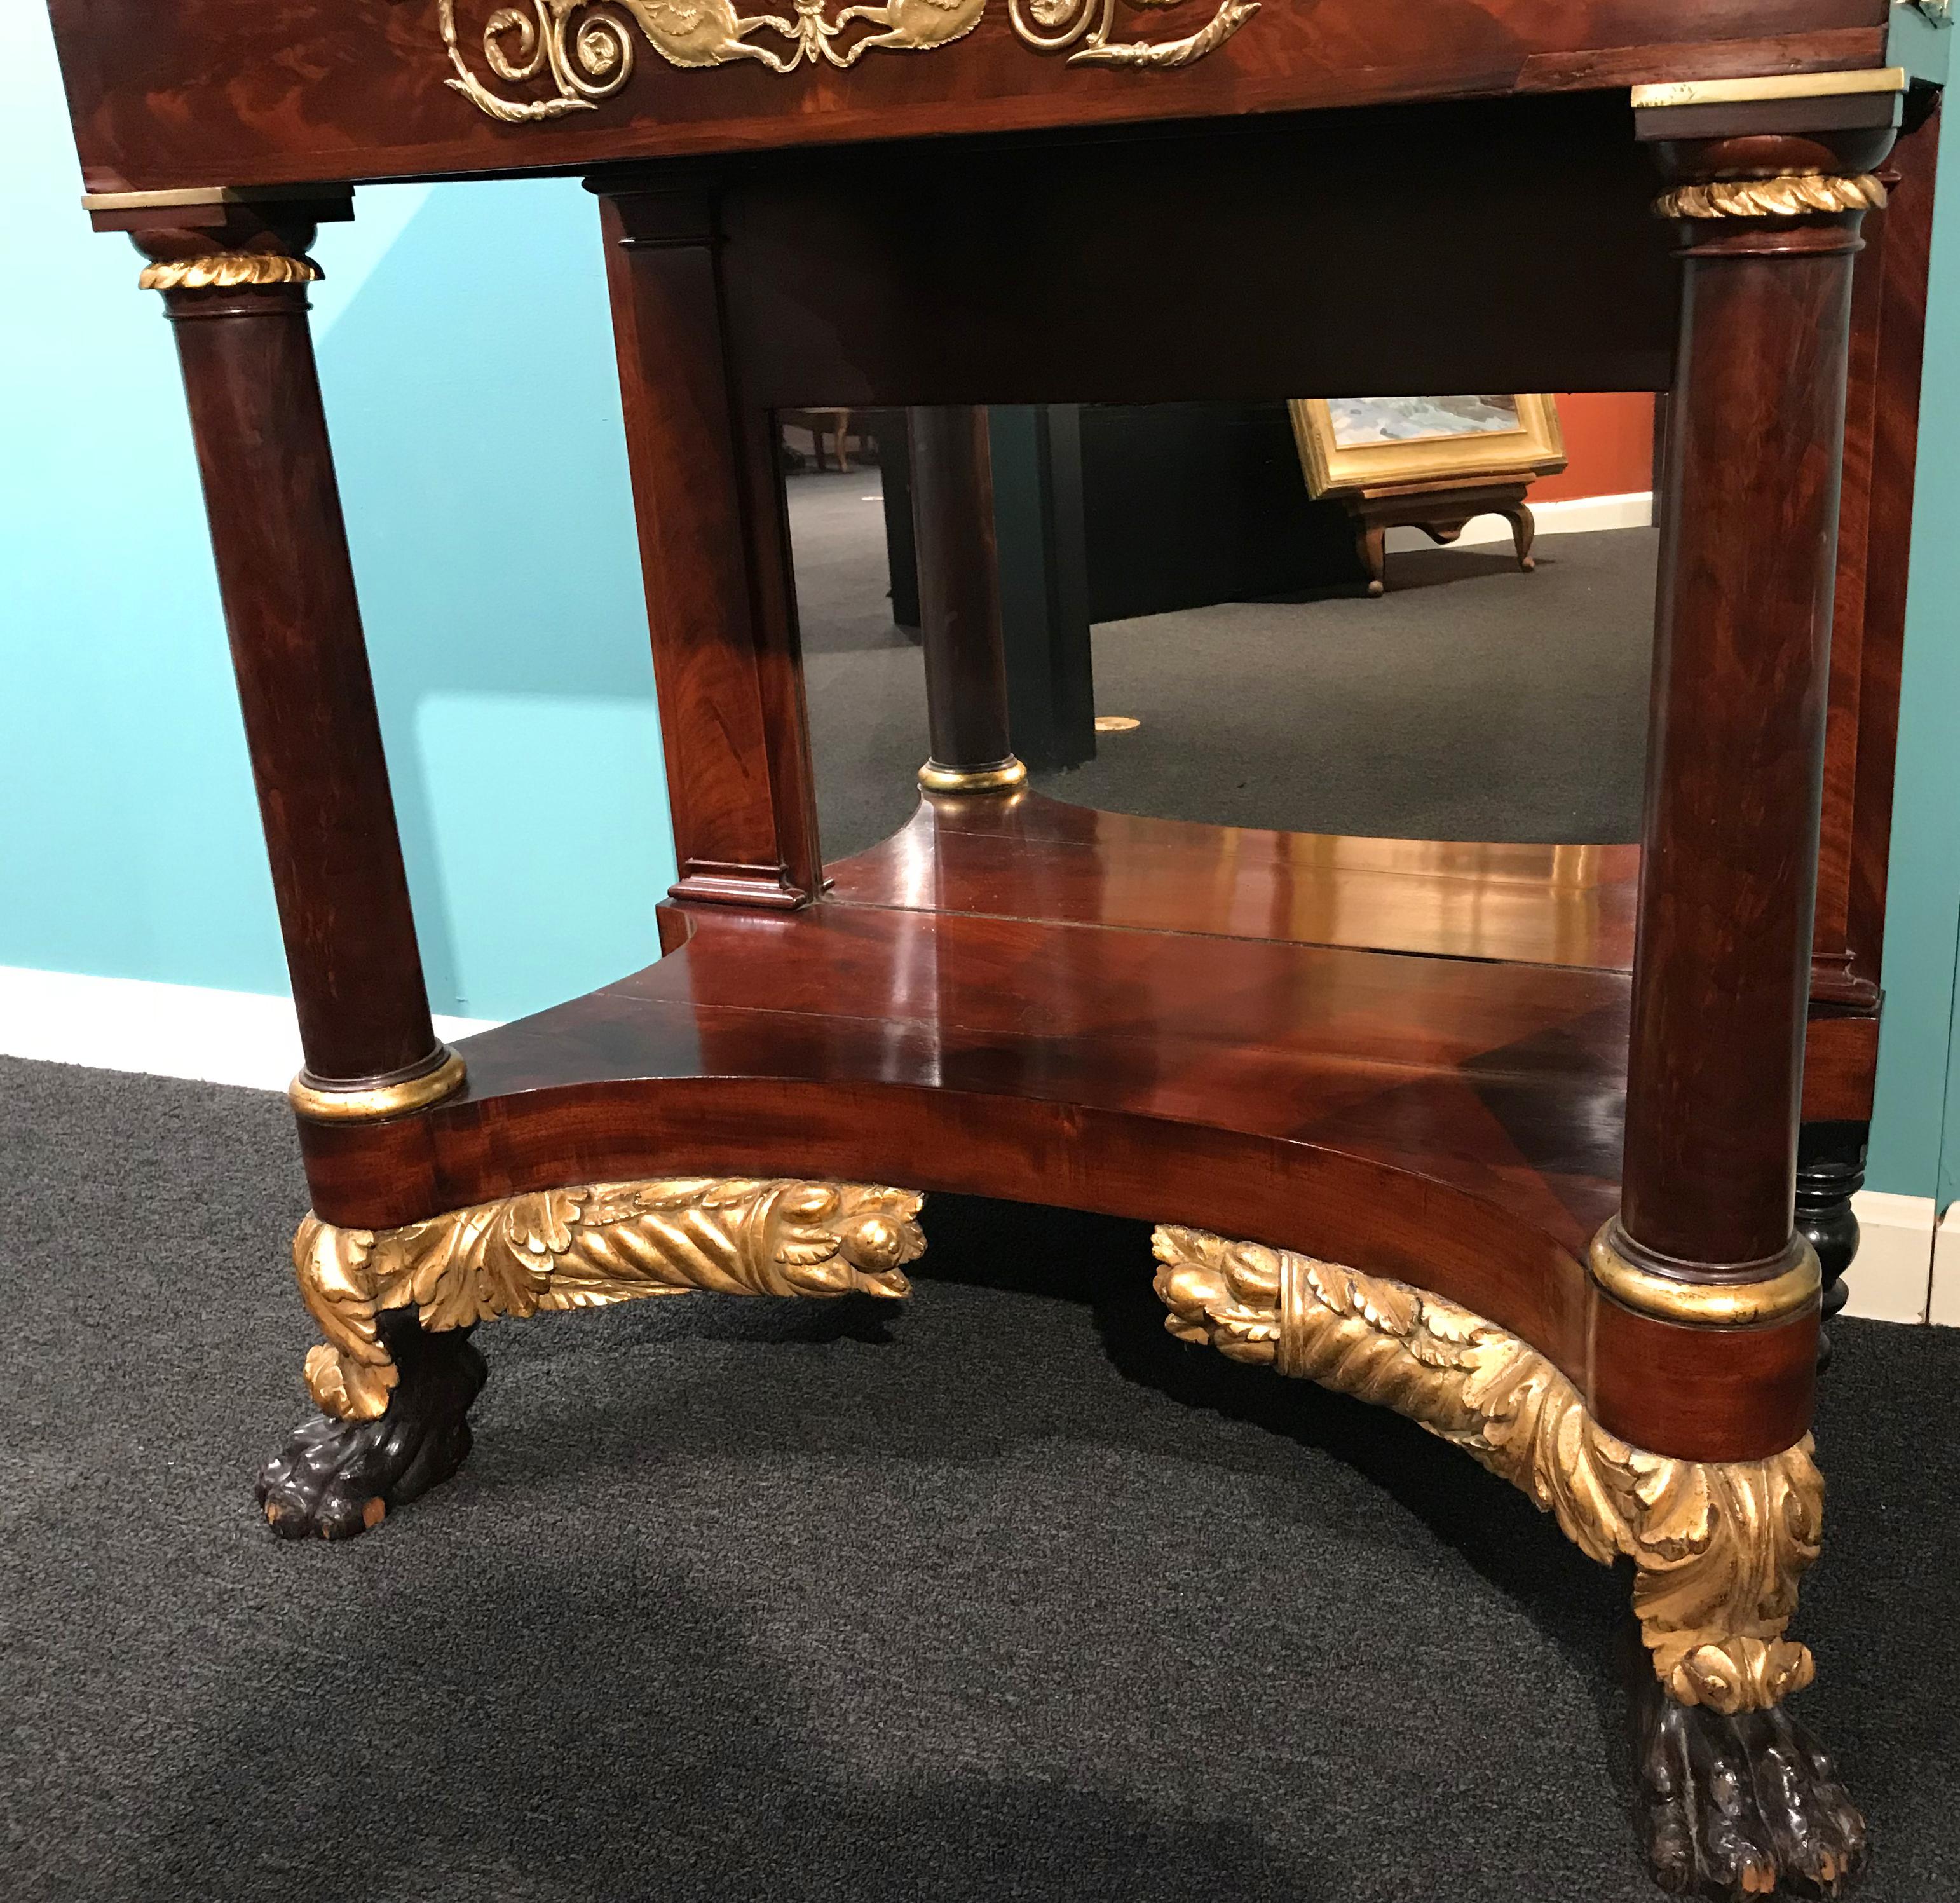 19th Century Exceptional New York Federal Mahogany Pier or Console Table, circa 1825